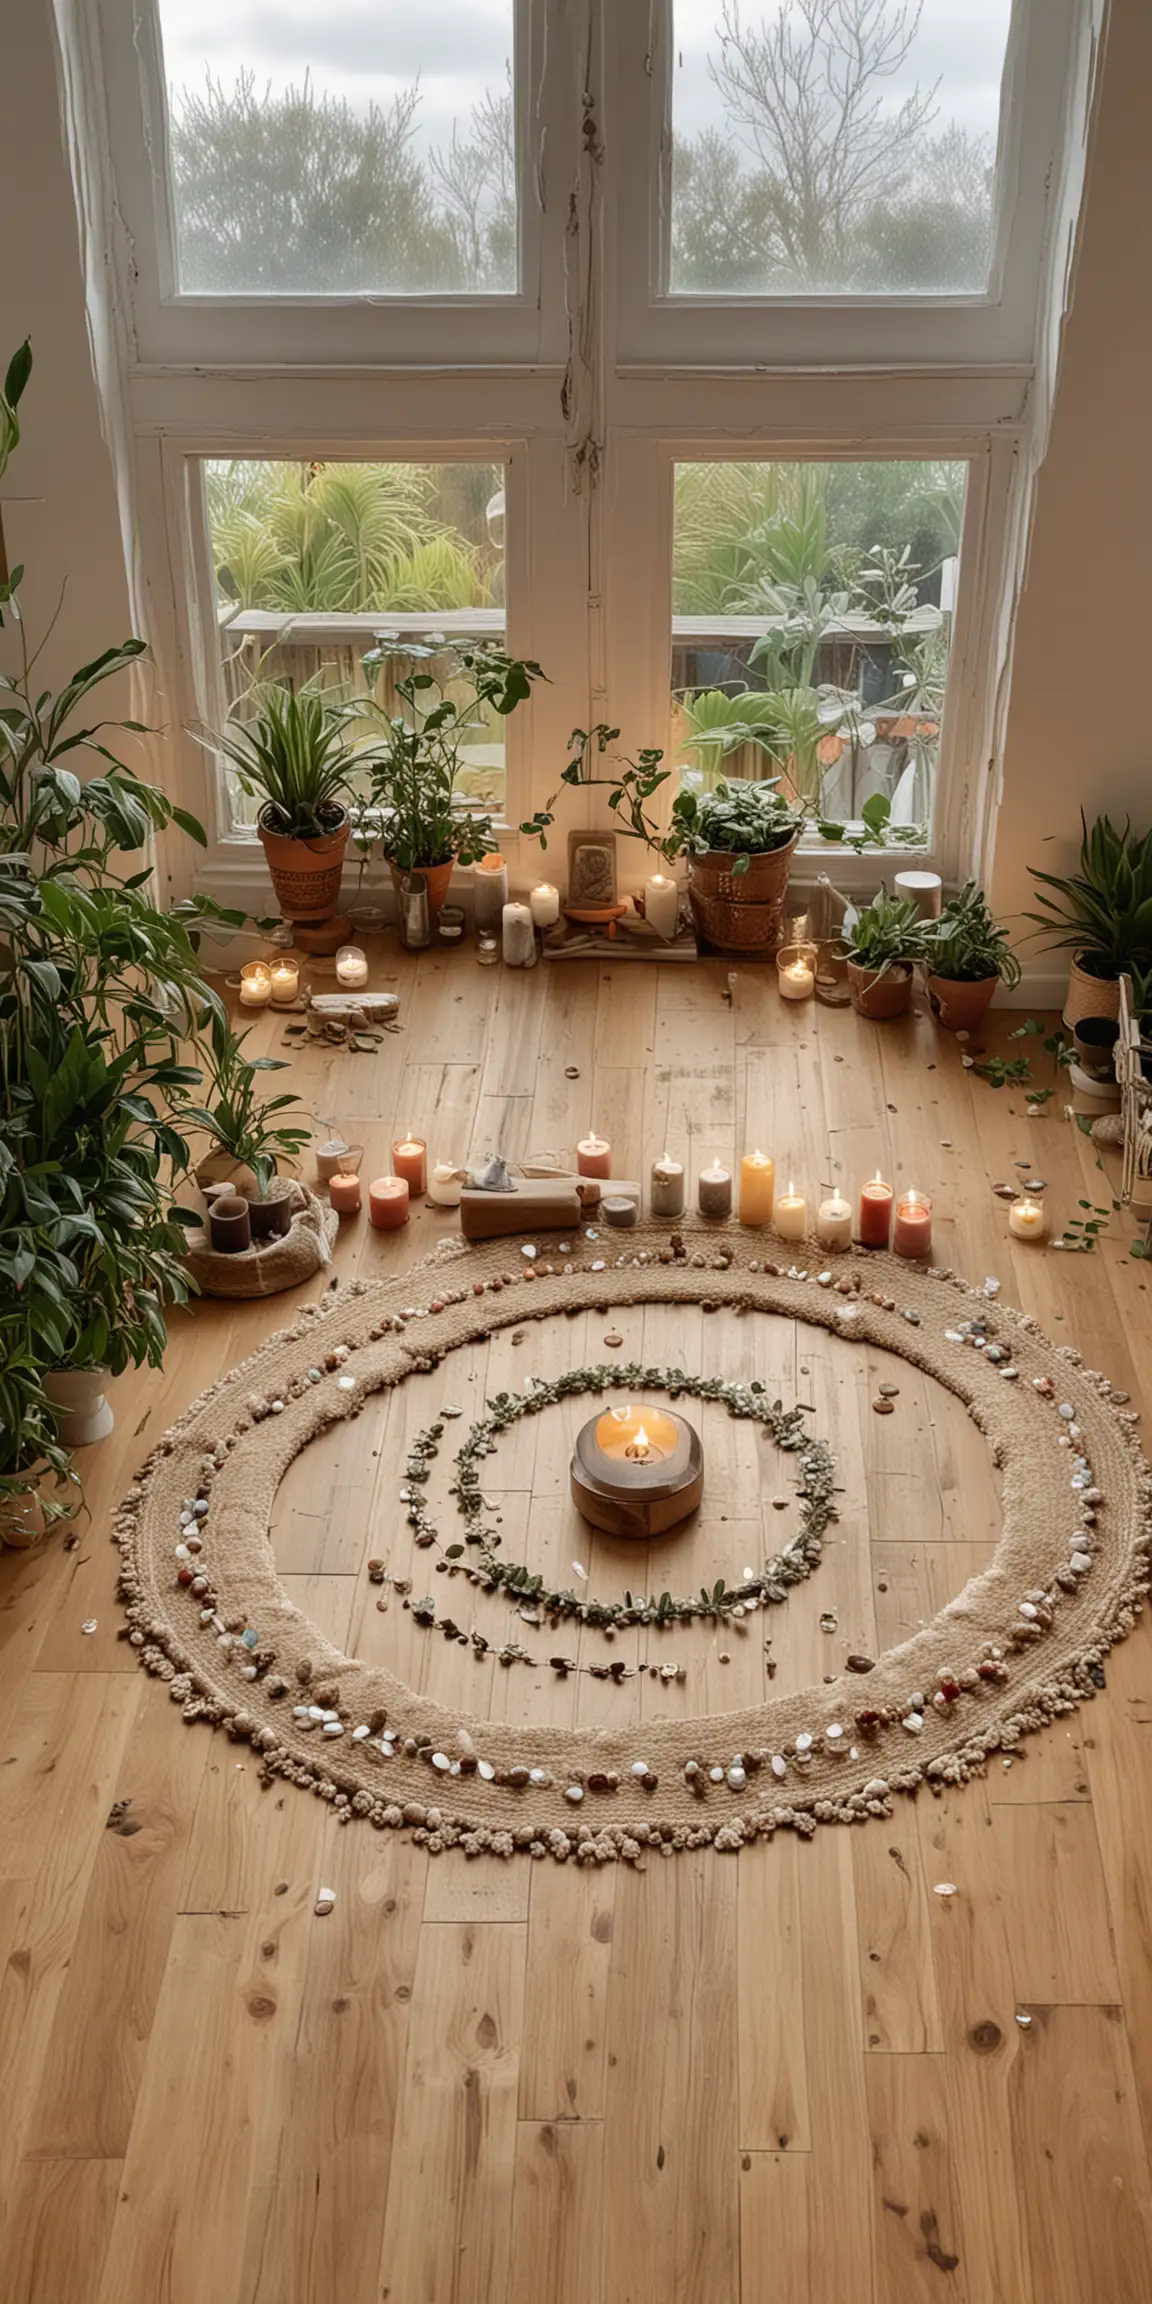  a light studio with wooden floorboards, plants and windows. yoga mats in a circle around an altar, with candles and crystals in the middle of the circle